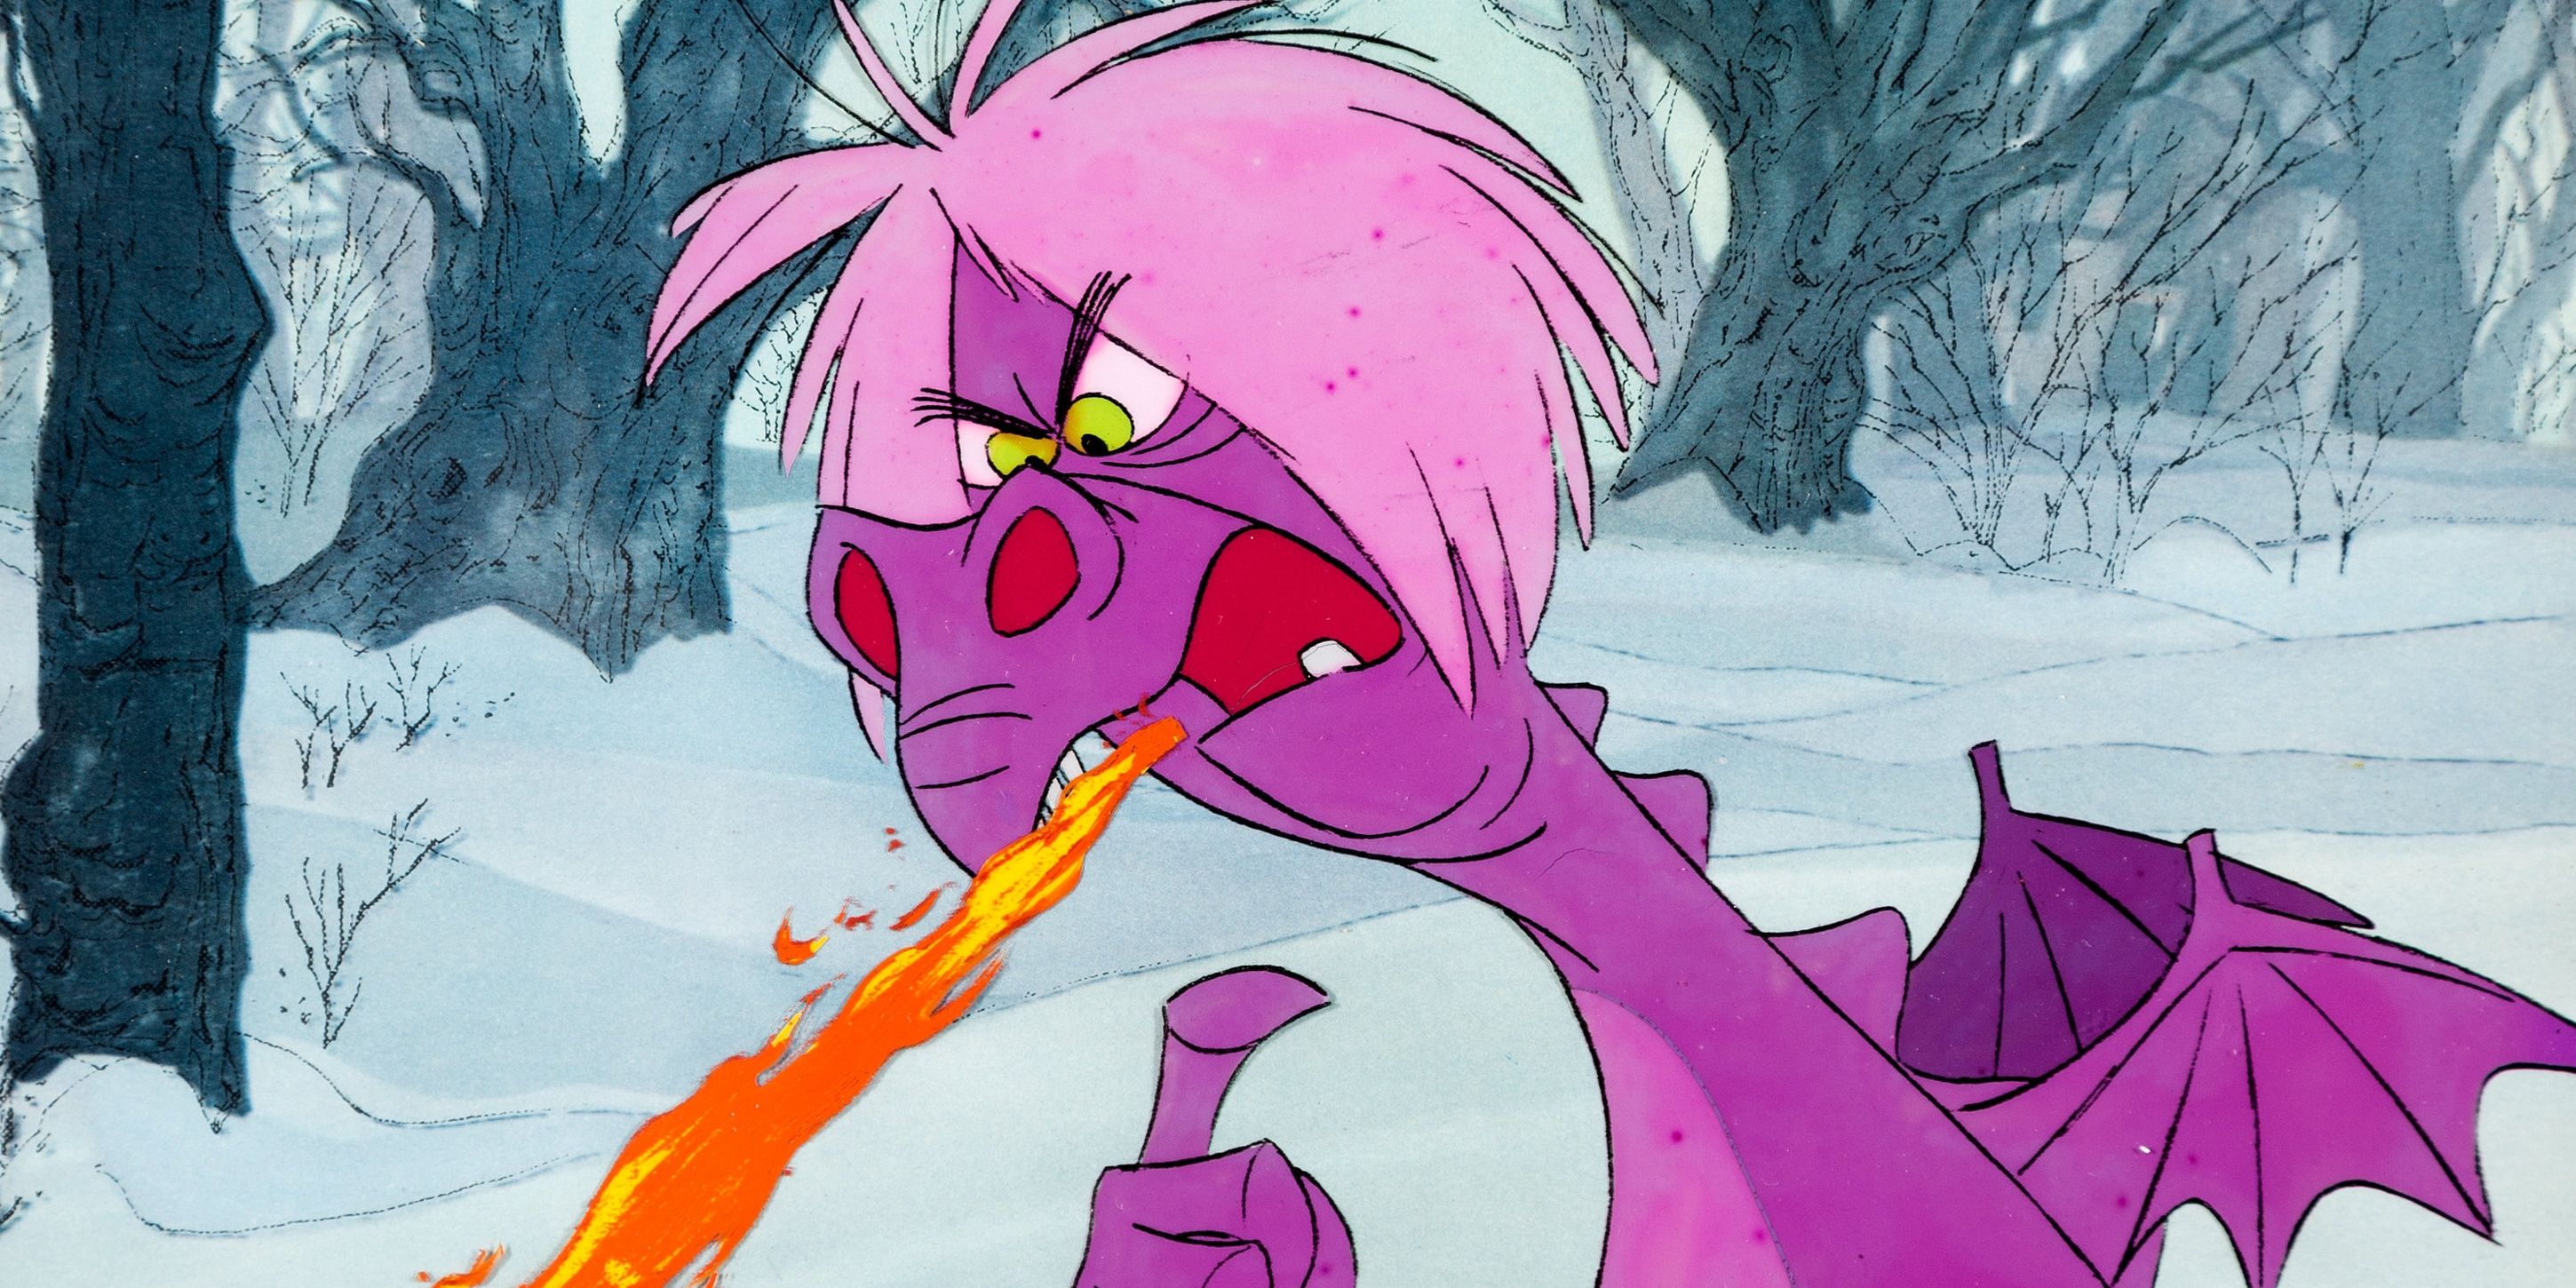 Madam Mim breathing fire in The Sword in the Stone